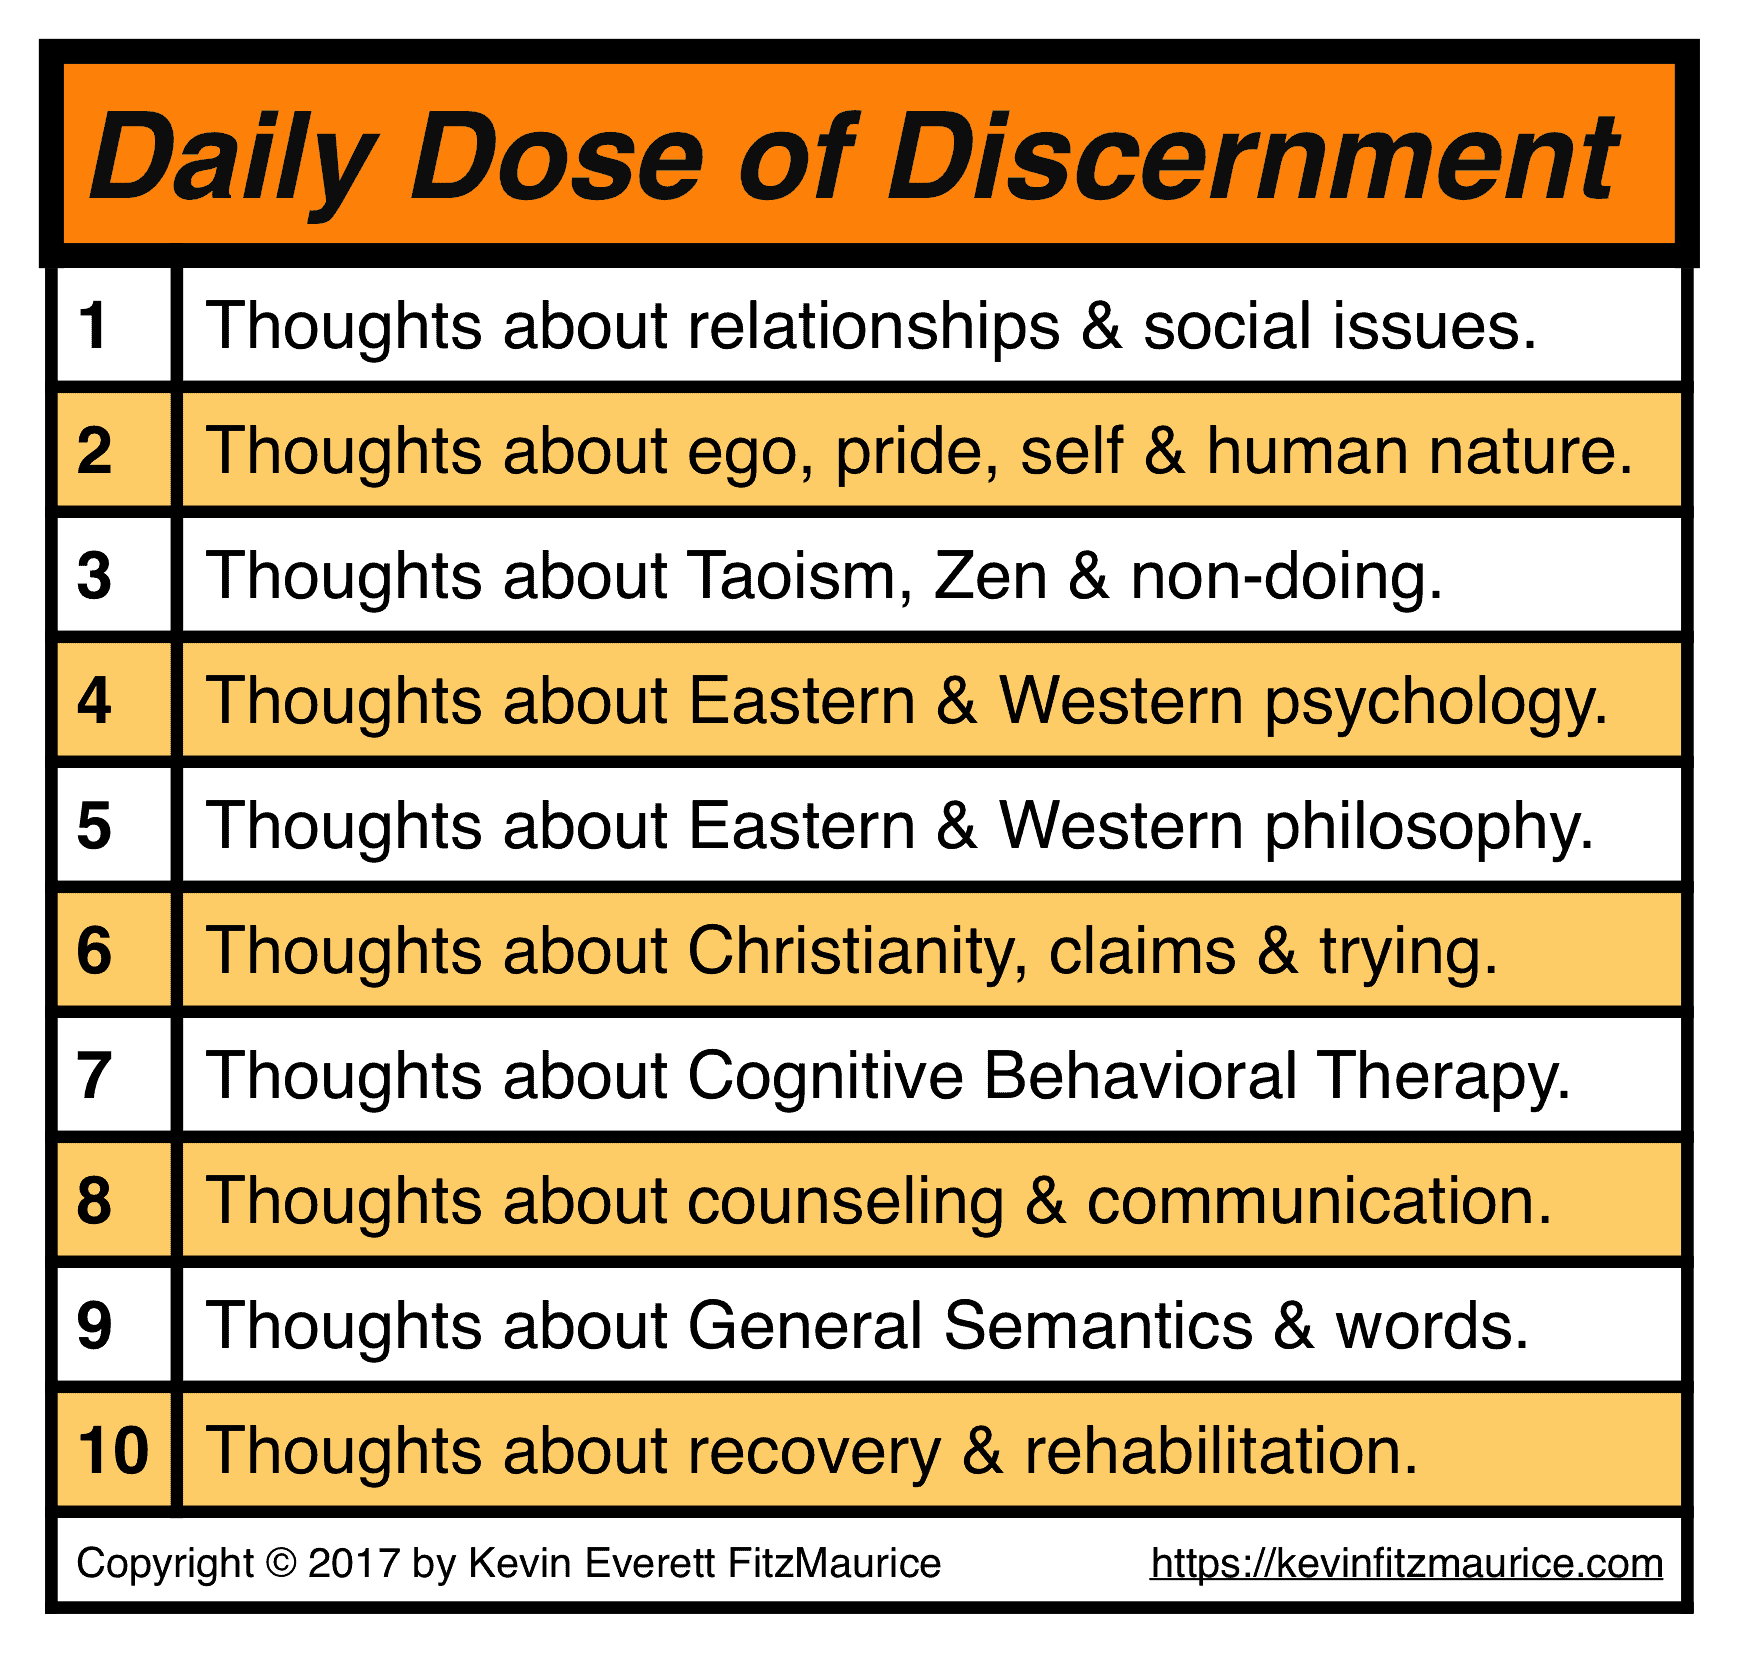 Daily Dose of Discernment thoughts